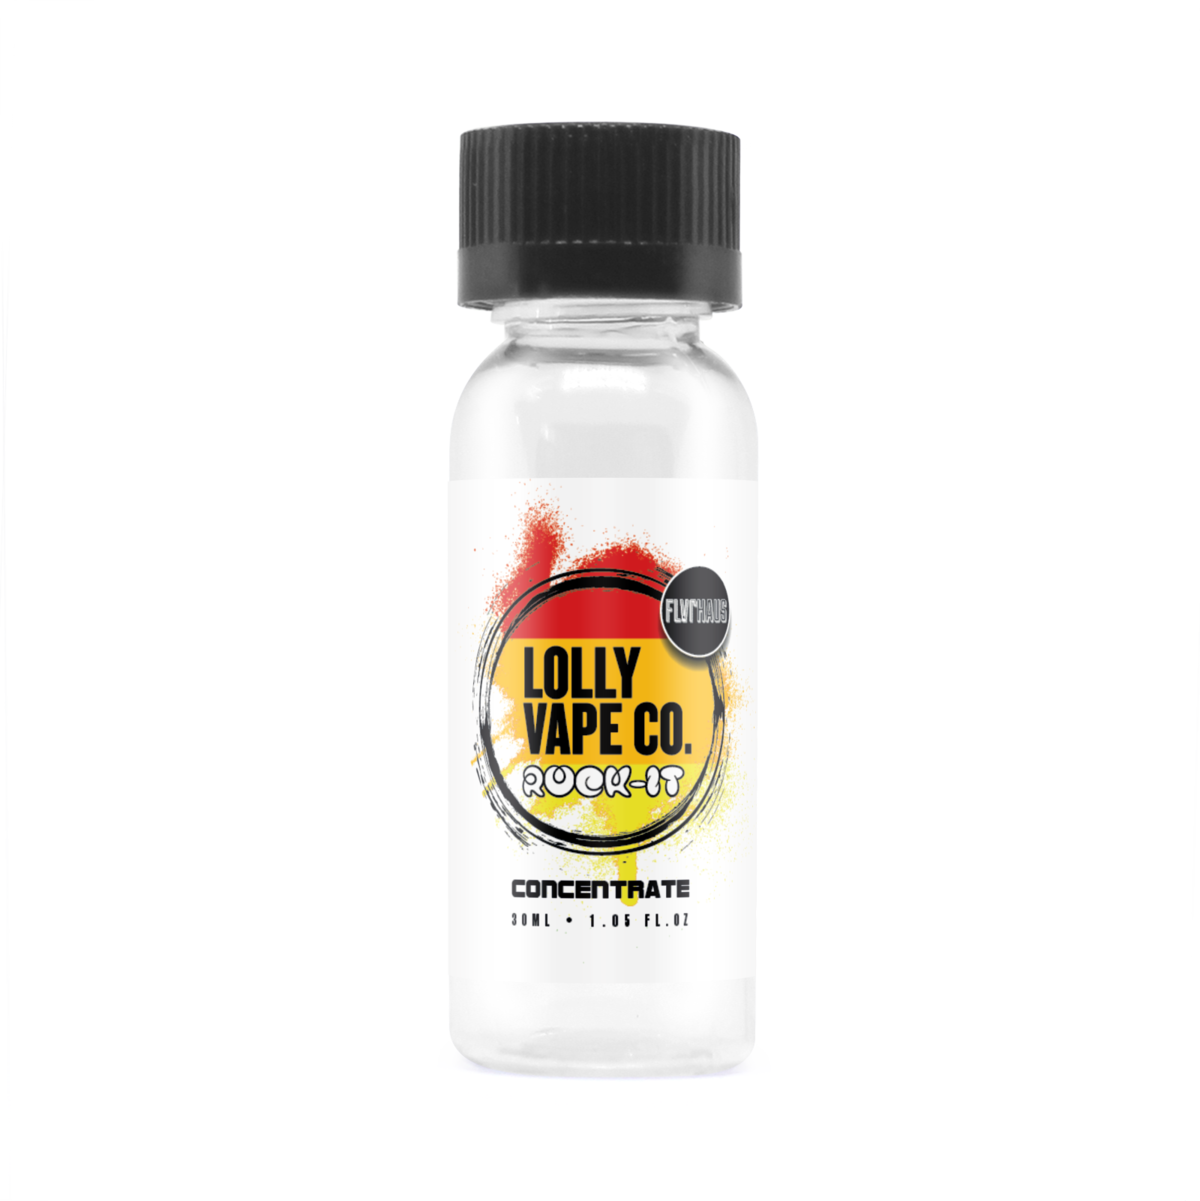 Rock it Ice Concentrate E-liquid by Lolly Vape Co 30ml